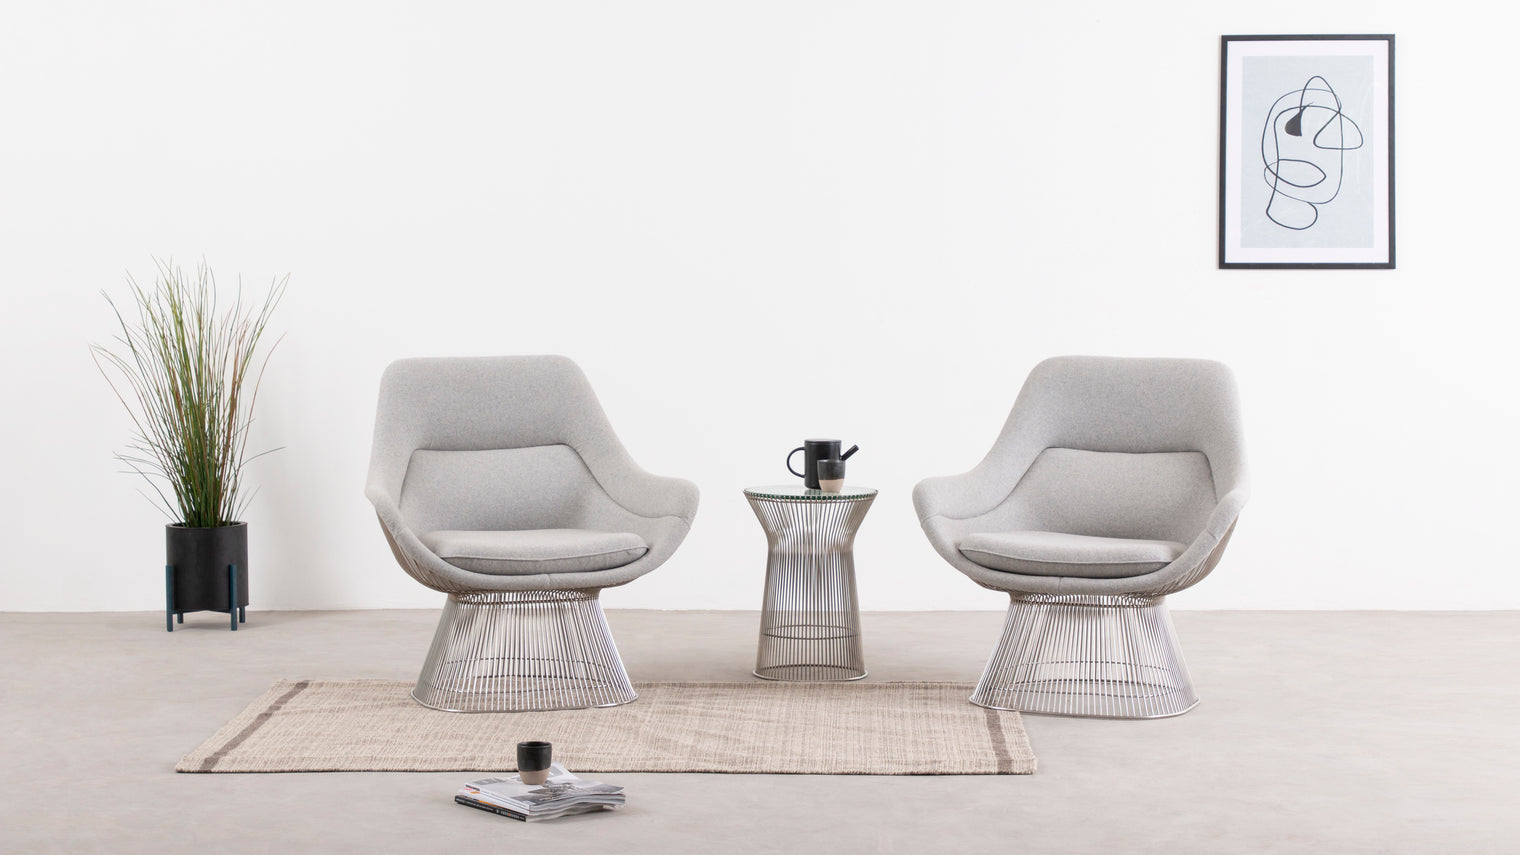 The perfect fusion of form and functionality|The Platner Inspired Collection combines a stunningly unique aesthetic with functionality and comfortability. Our Lounge Chair is truly the trifecta. It’s a beautiful statement piece that’s just as cozy as it is visually appealing.
